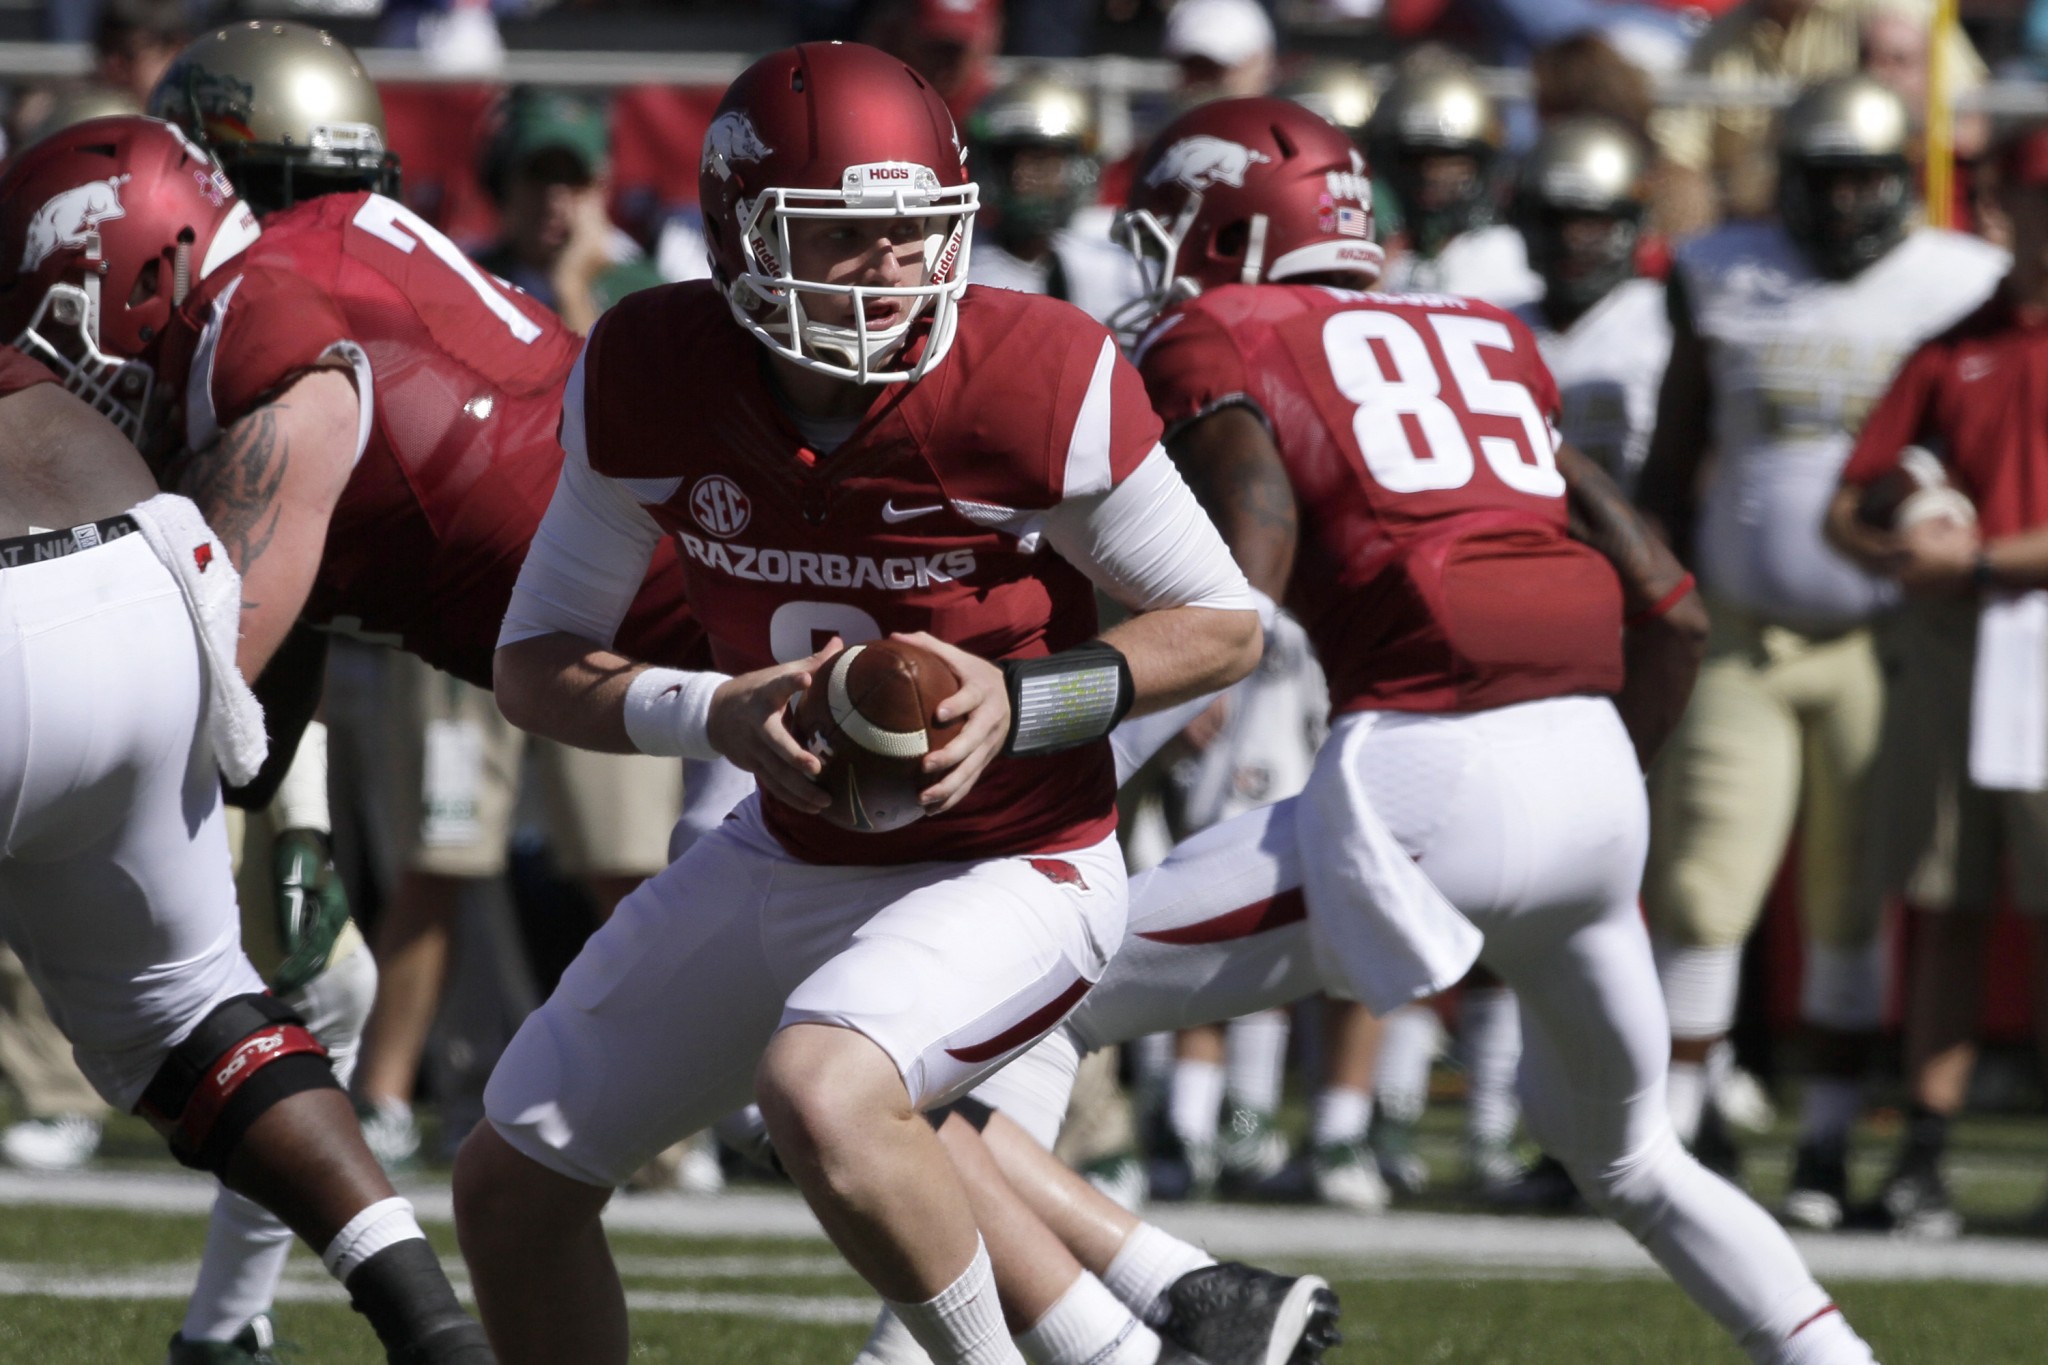 Arkansas quarterback Austin Allen, center, prepares to hand off in the second half of an NCAA college football game in Fayetteville, Ark., Saturday, Oct. 25, 2014. Arkansas defeated UAB 45-17. (AP Photo/Danny Johnston)